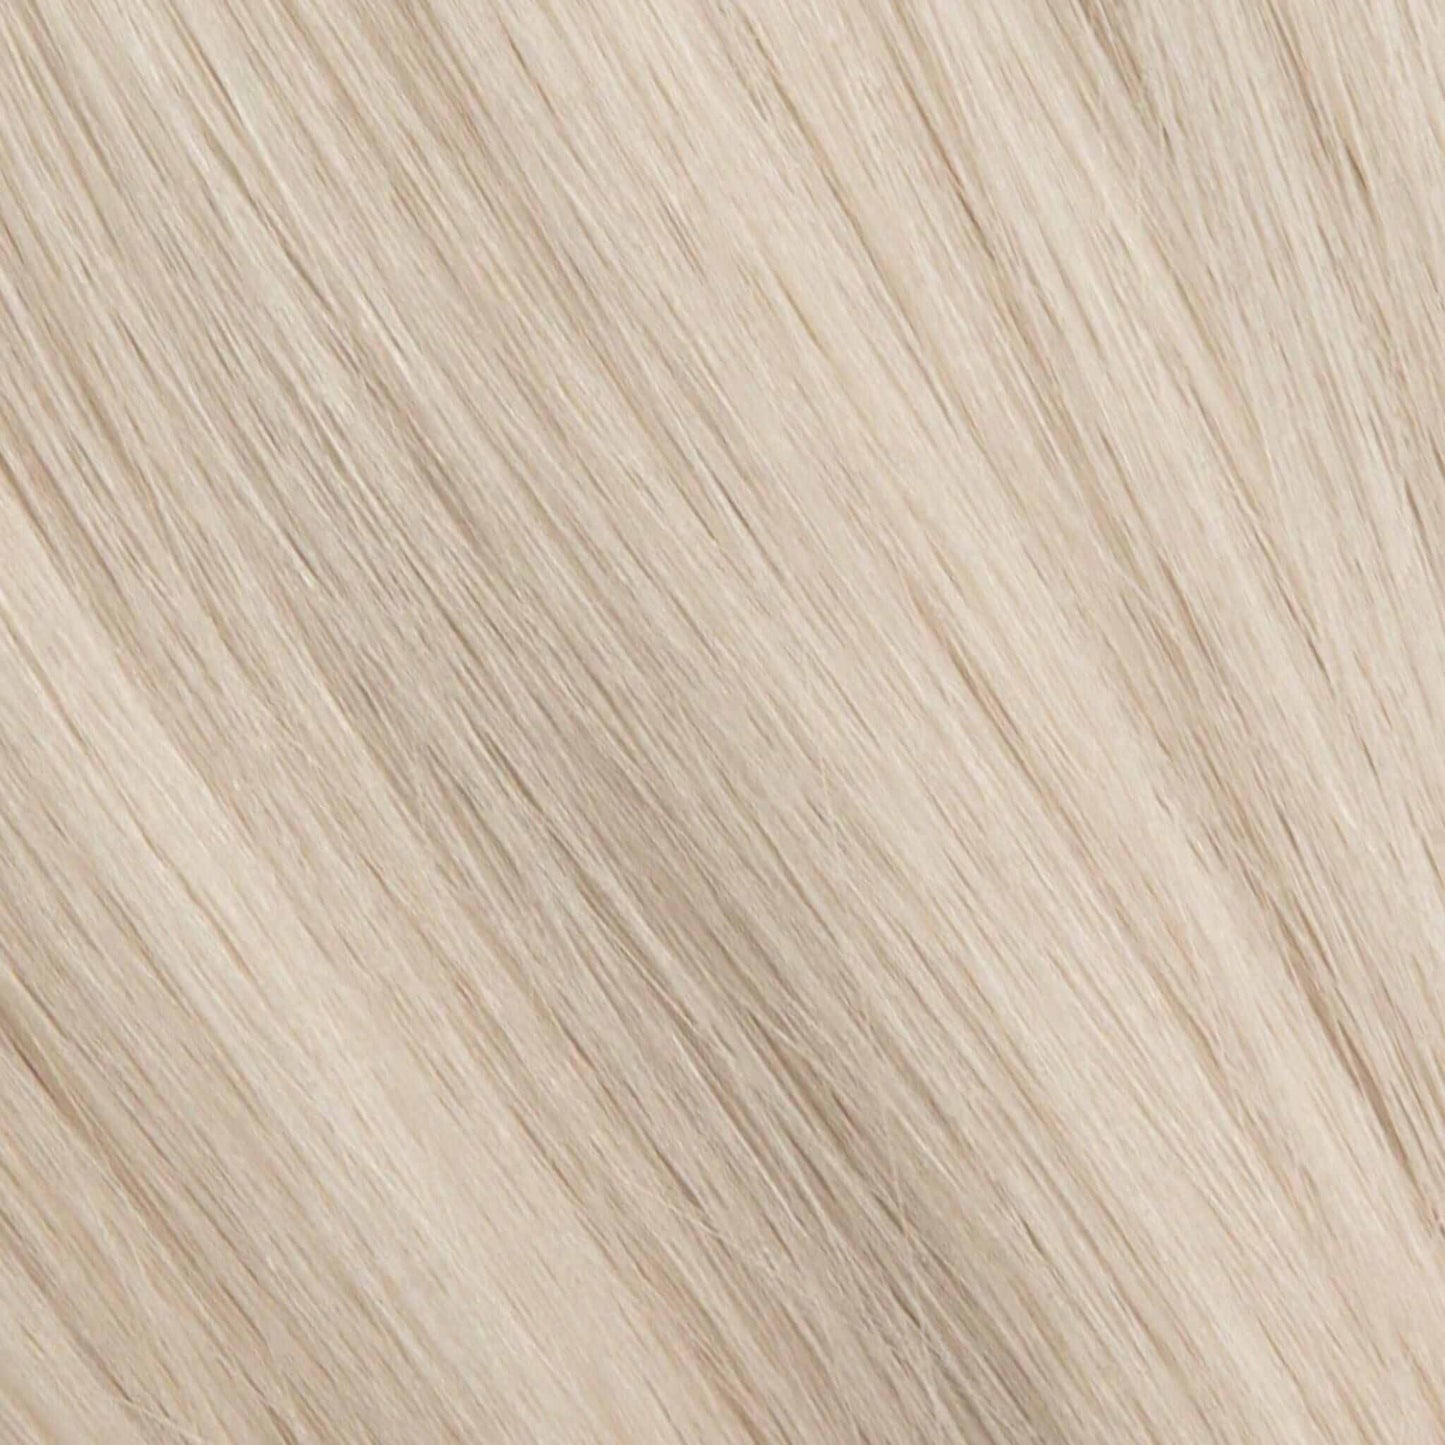 Genius (Micro) Weft 24" 94g Professional Hair Extensions - #80 White Blonde